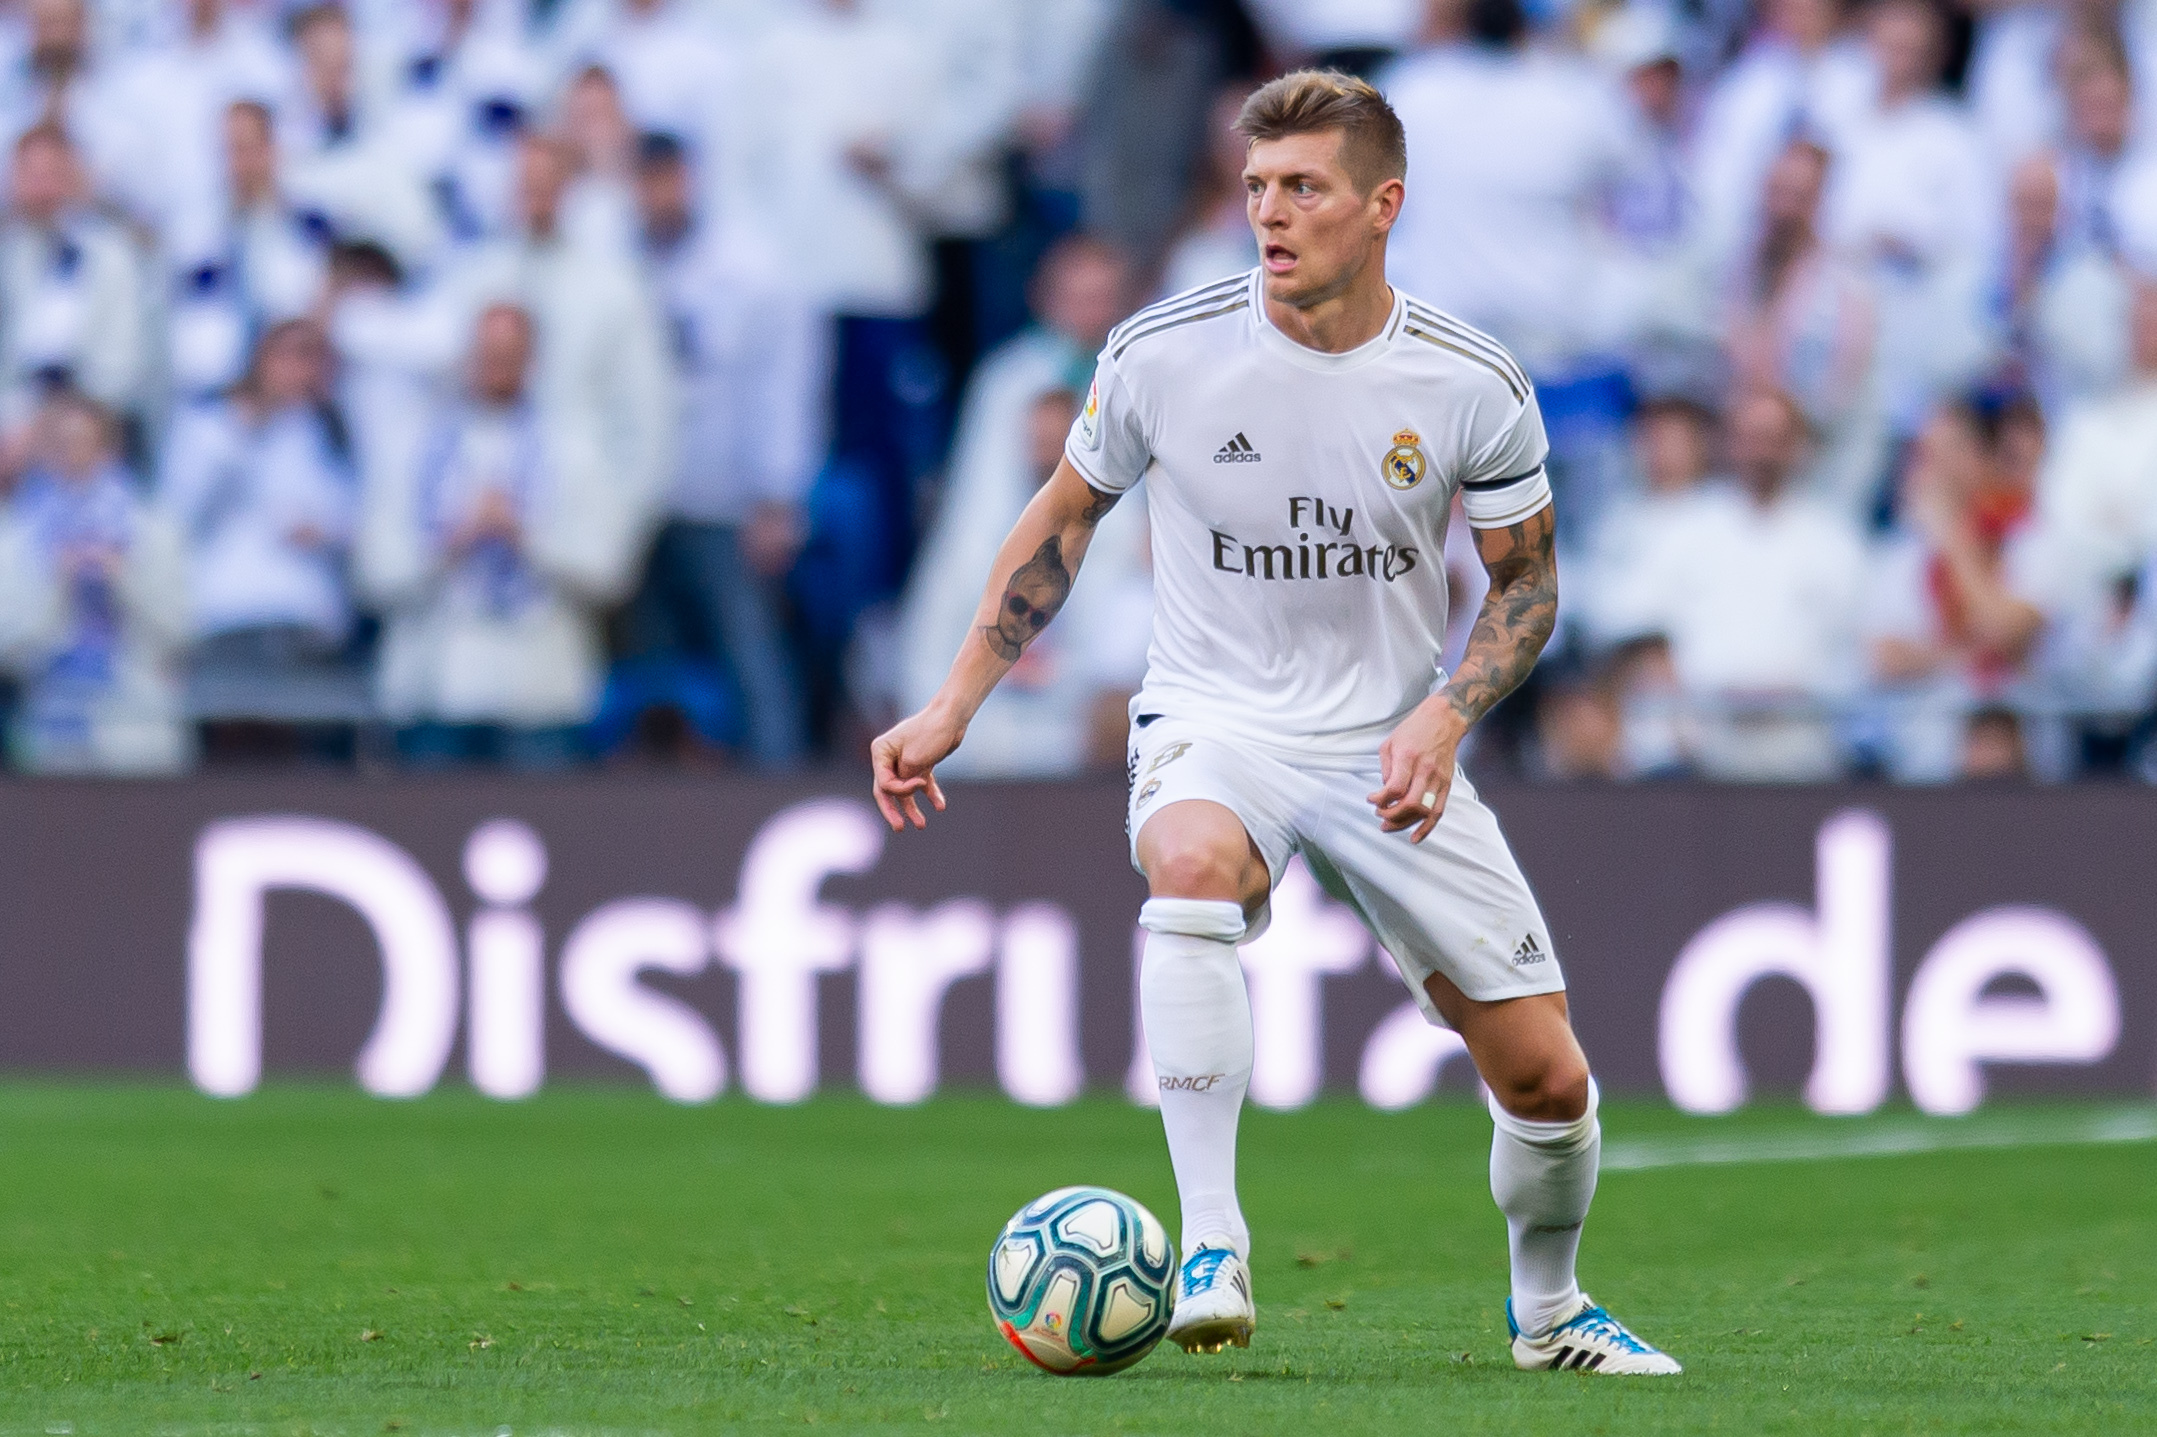 Toni Kroos Talks Retiring After Real Madrid Contract Ends, Won't Play 'Until 38' | Bleacher Report | Latest News, Videos and Highlights